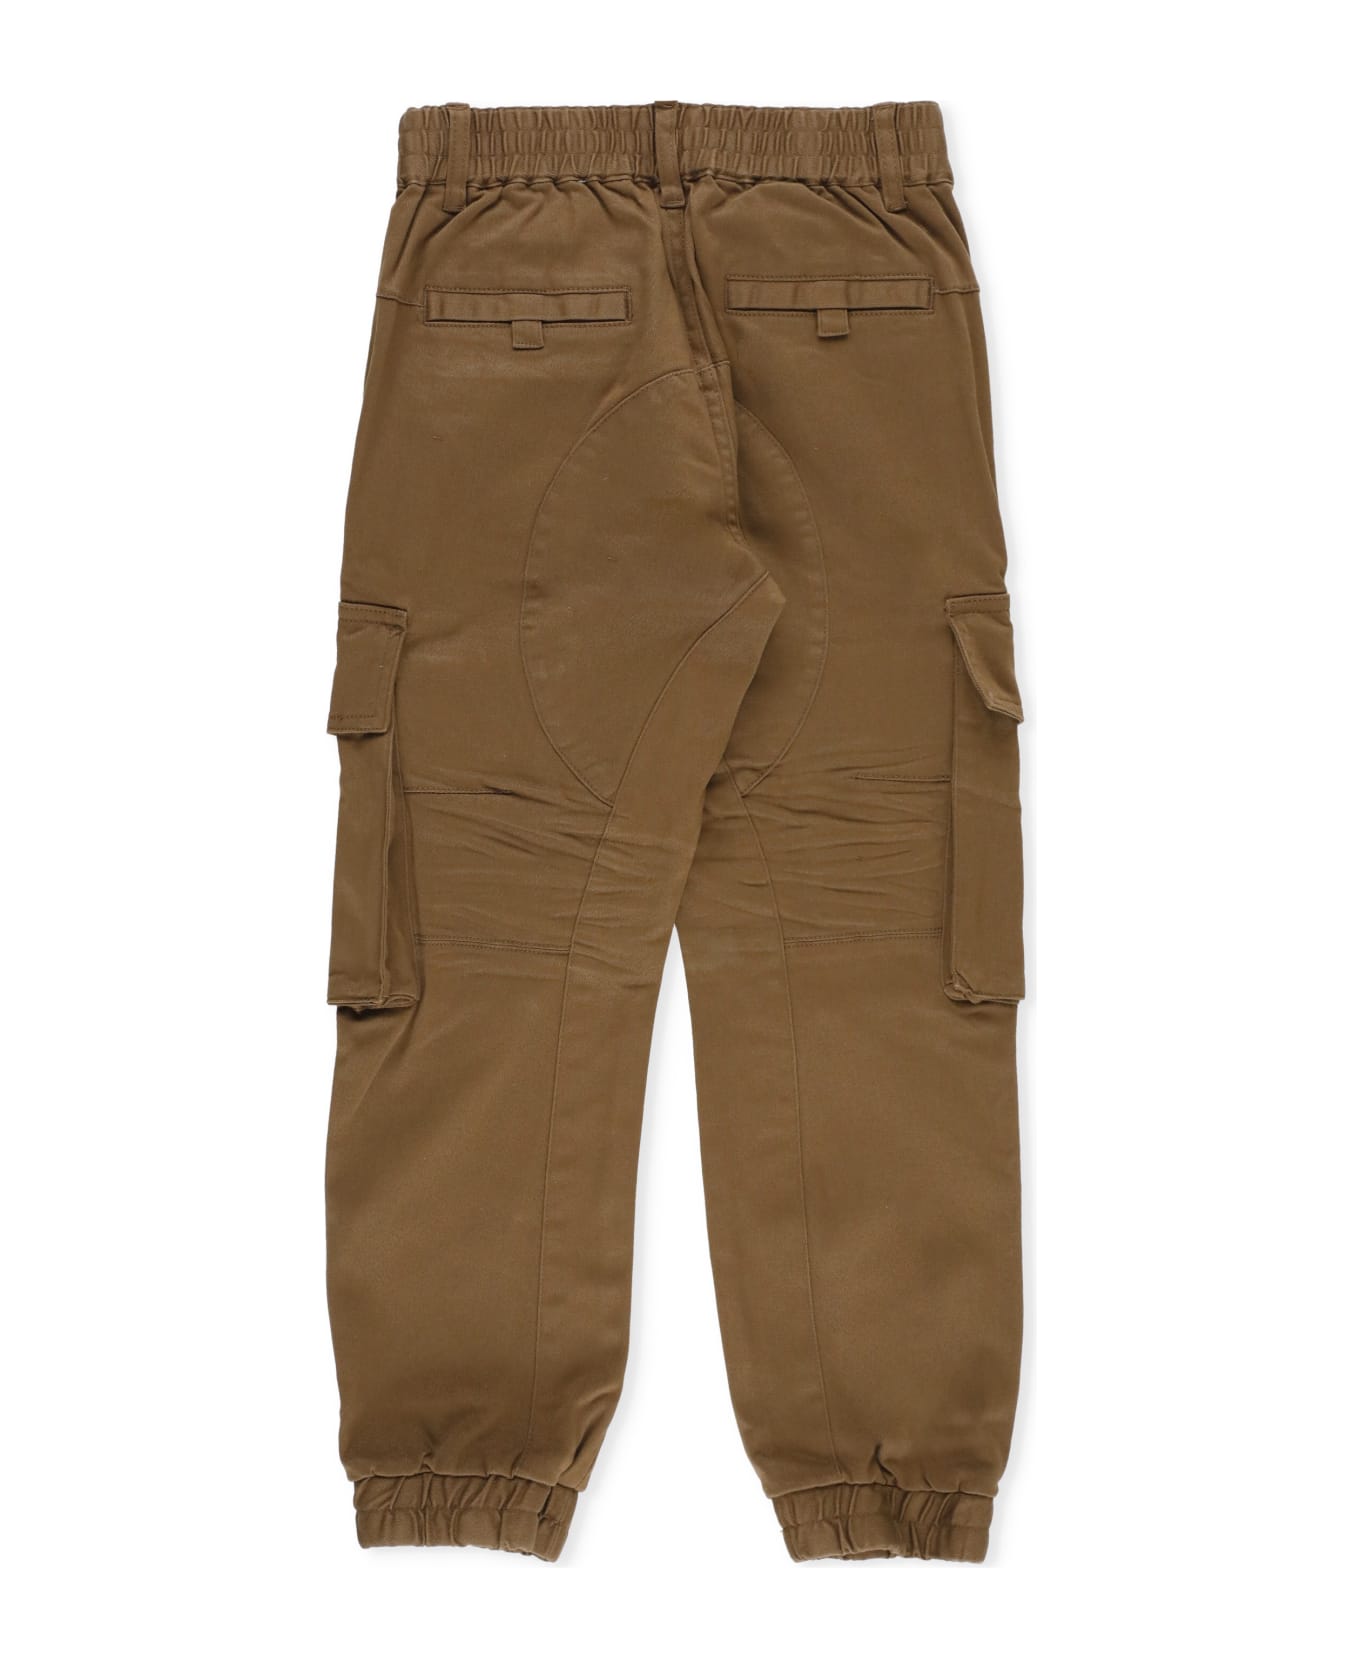 Dsquared2 Logoed Cargo Trousers - Brown ボトムス